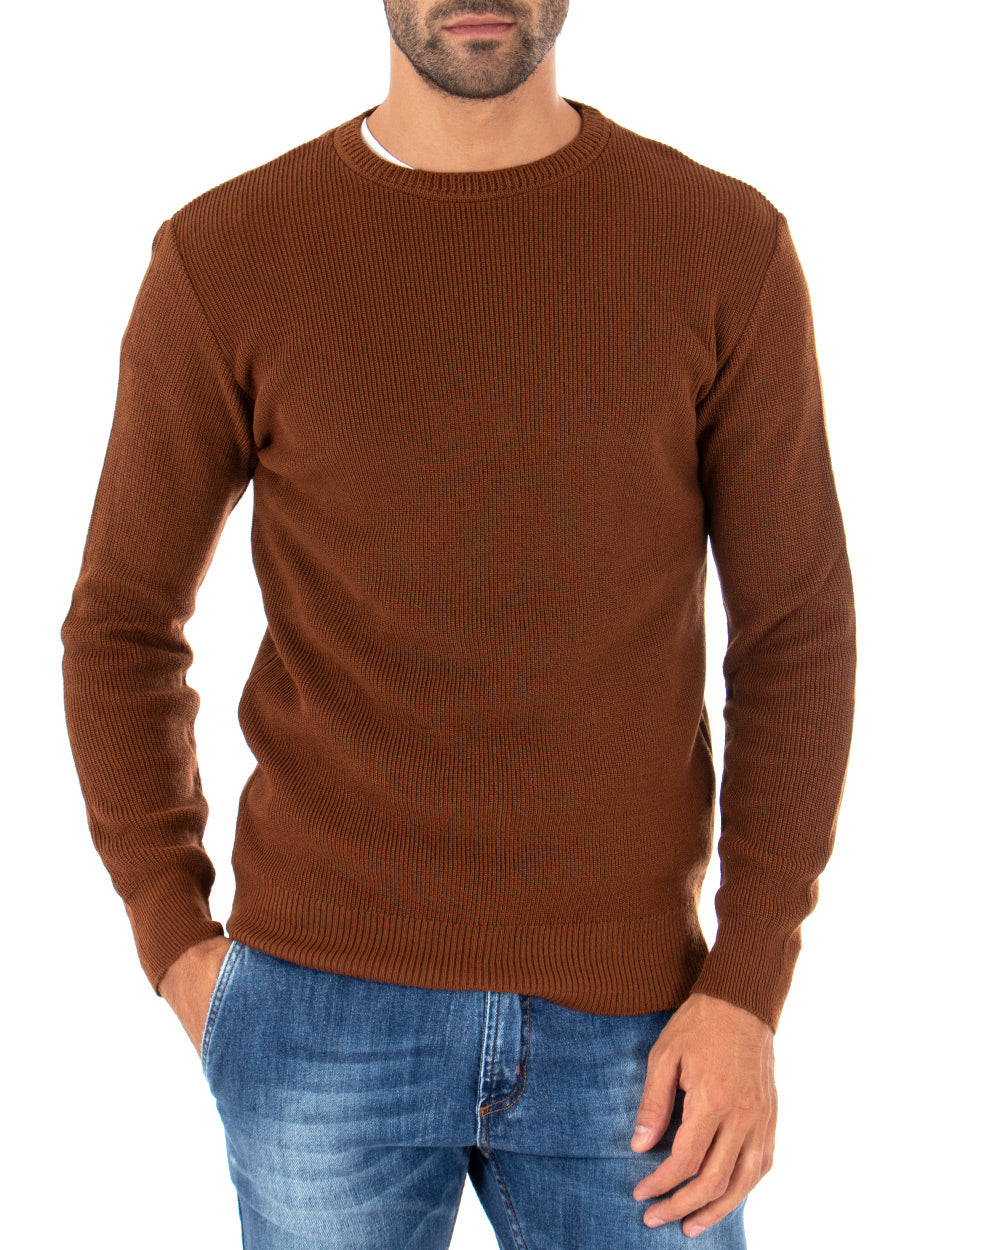 Men's Sweater Long Sleeves Round Neck Basic Solid Color Tobacco GIOSAL